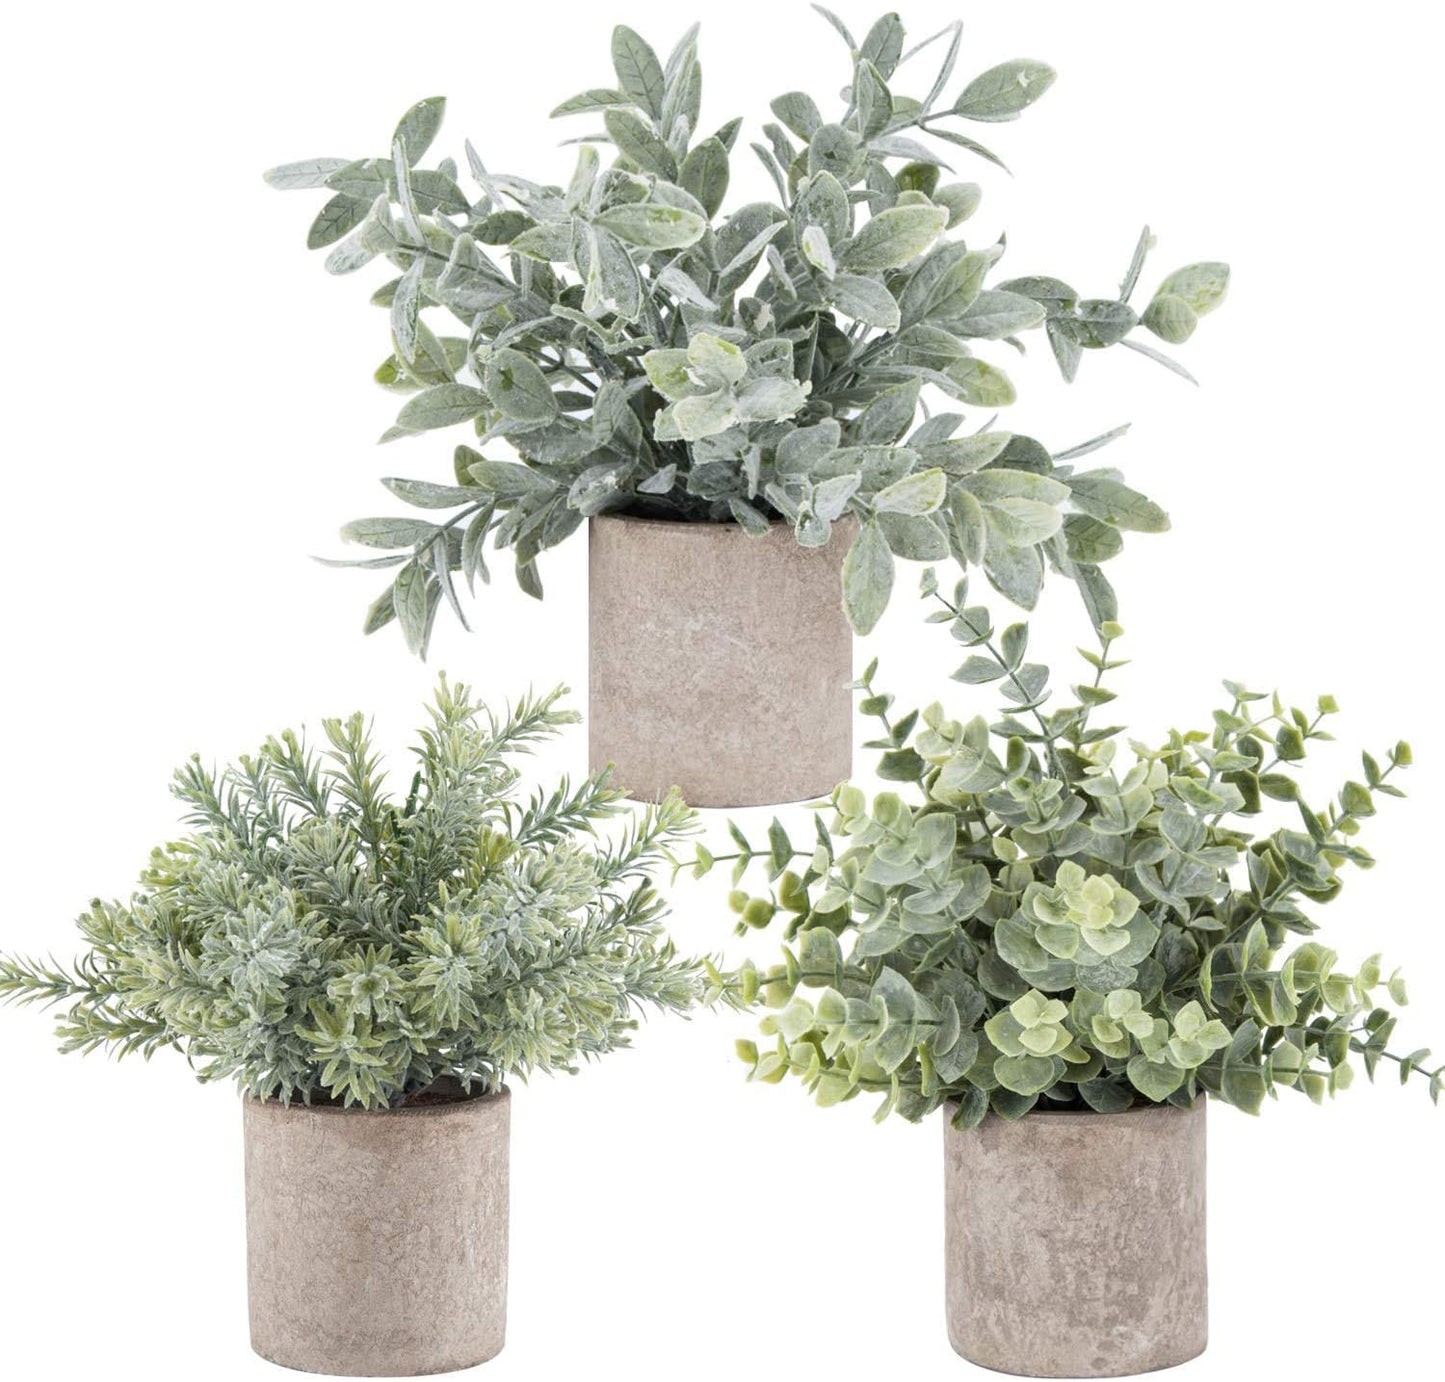 Aldricx® 3 Mini Potted Fake Plants for Home Office Décor